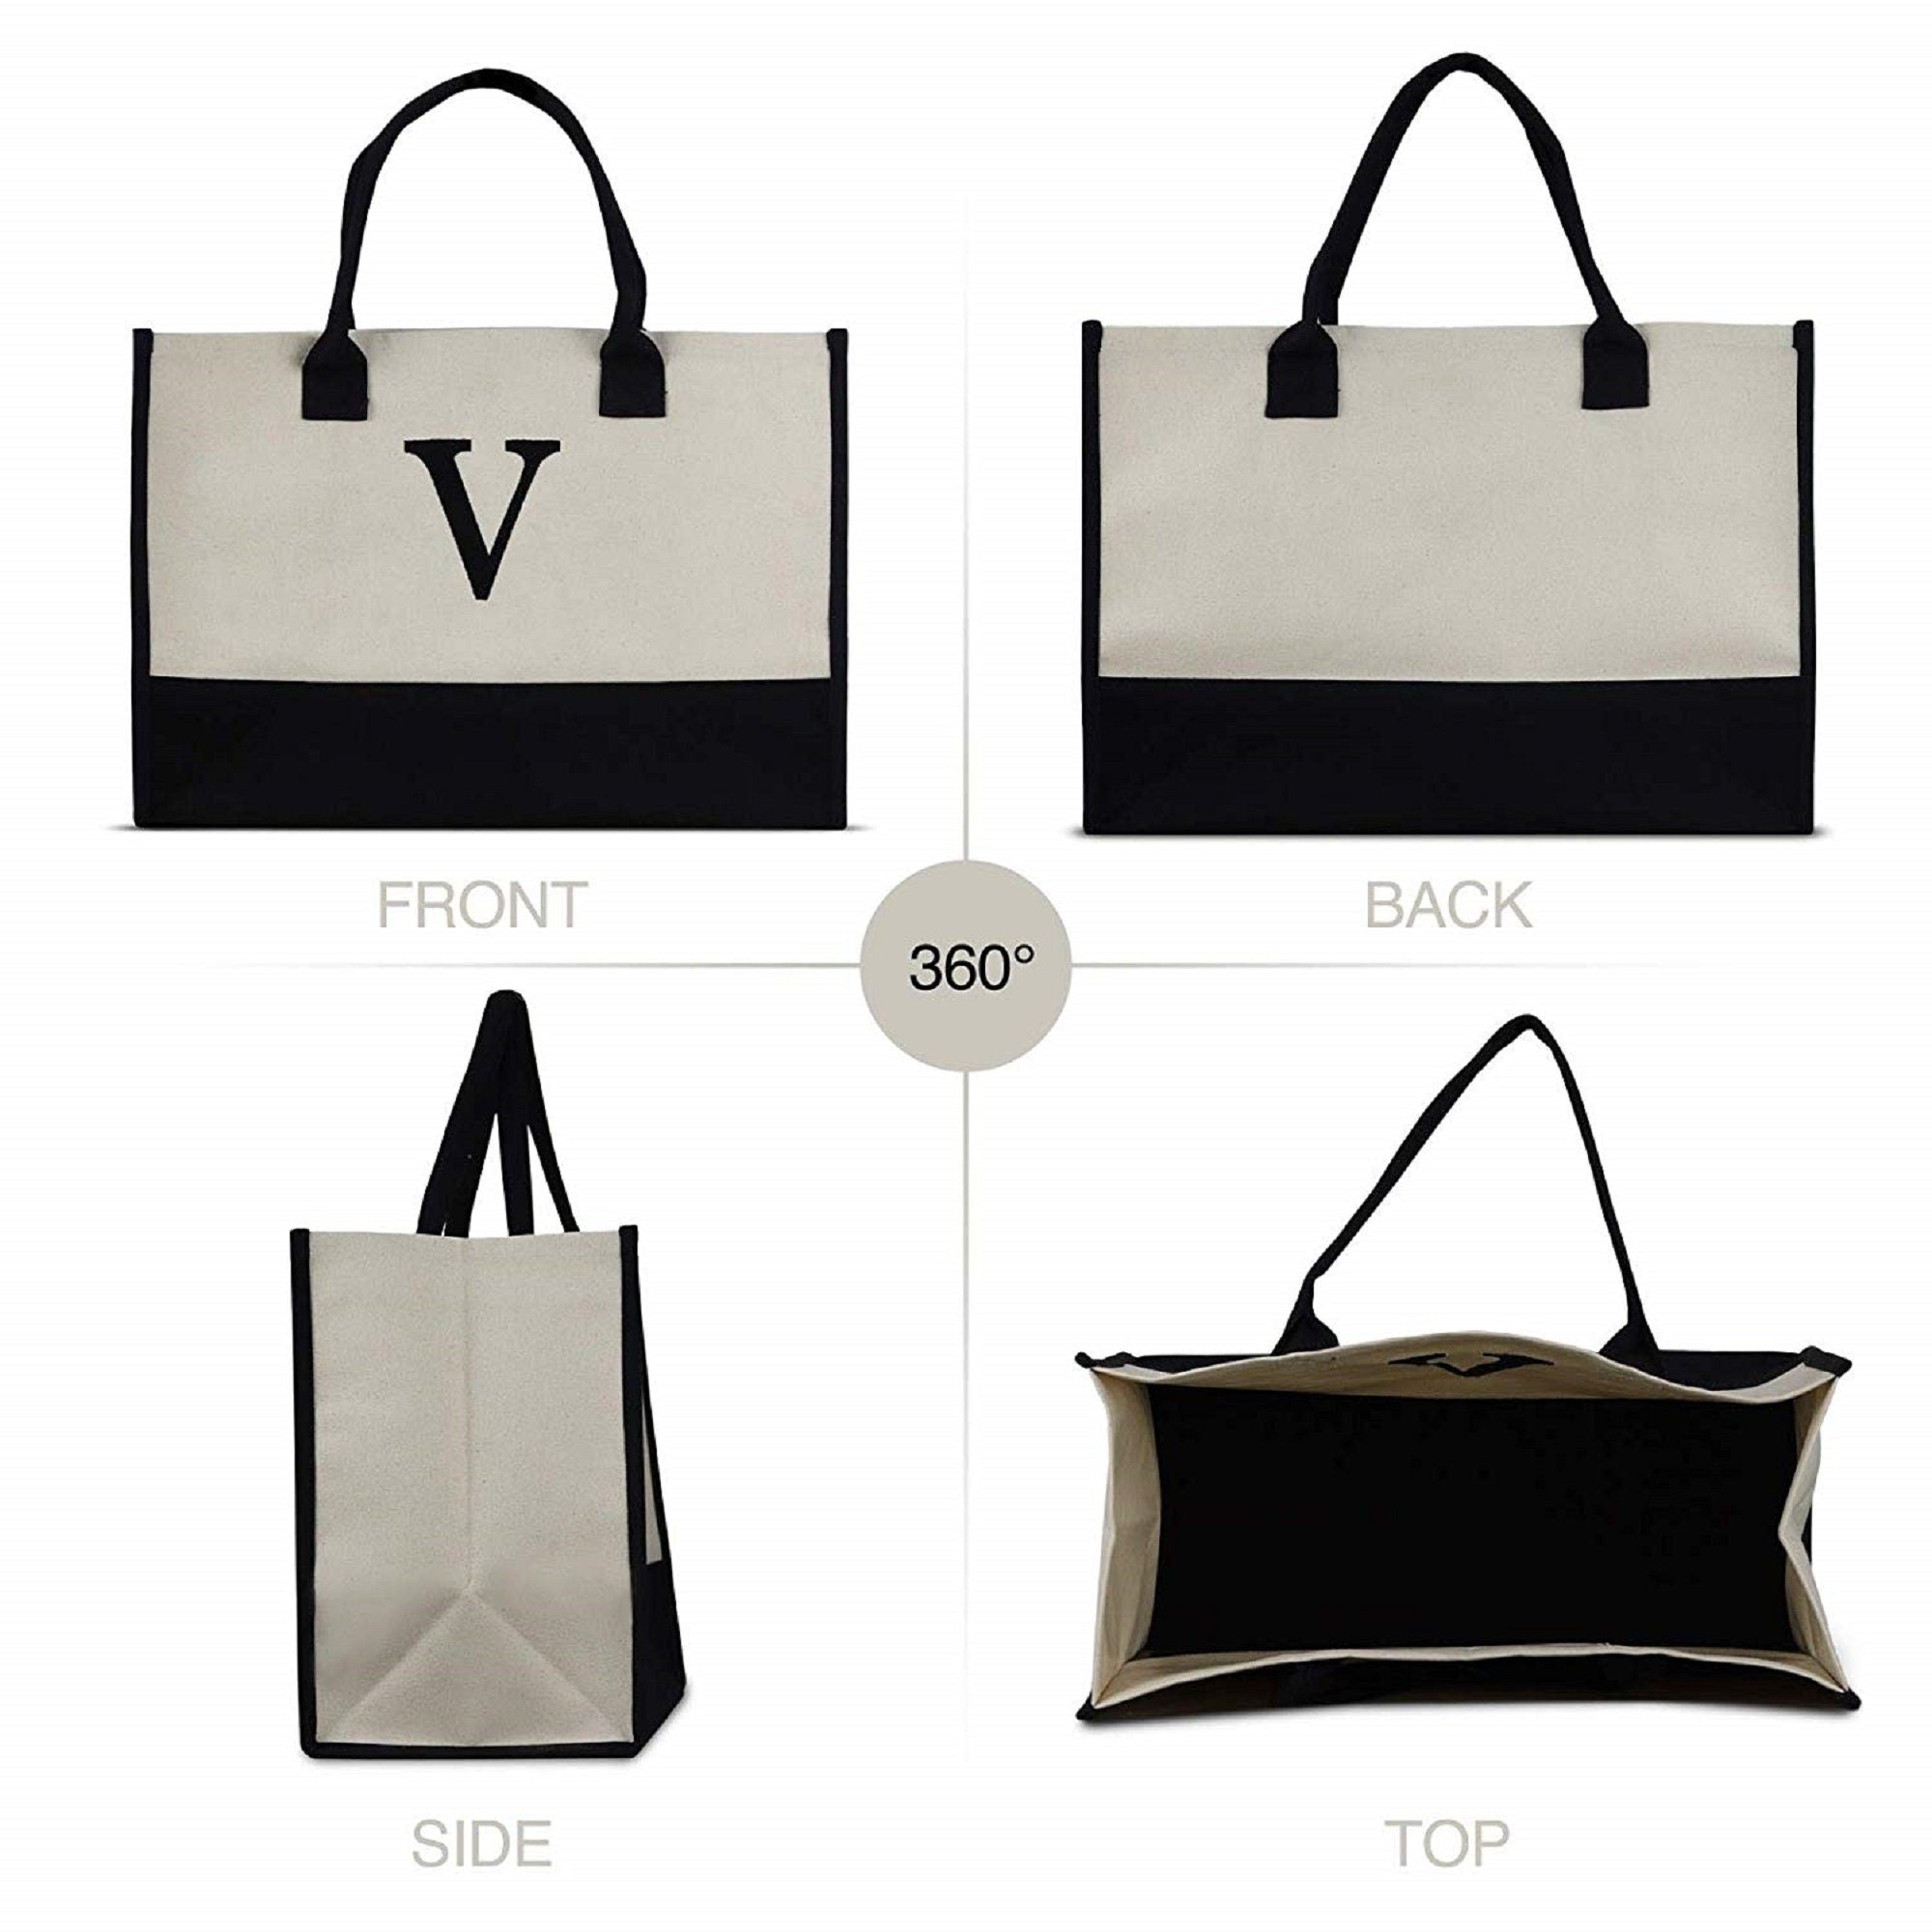 Canvas Tote Bag - Customize With Name Initial